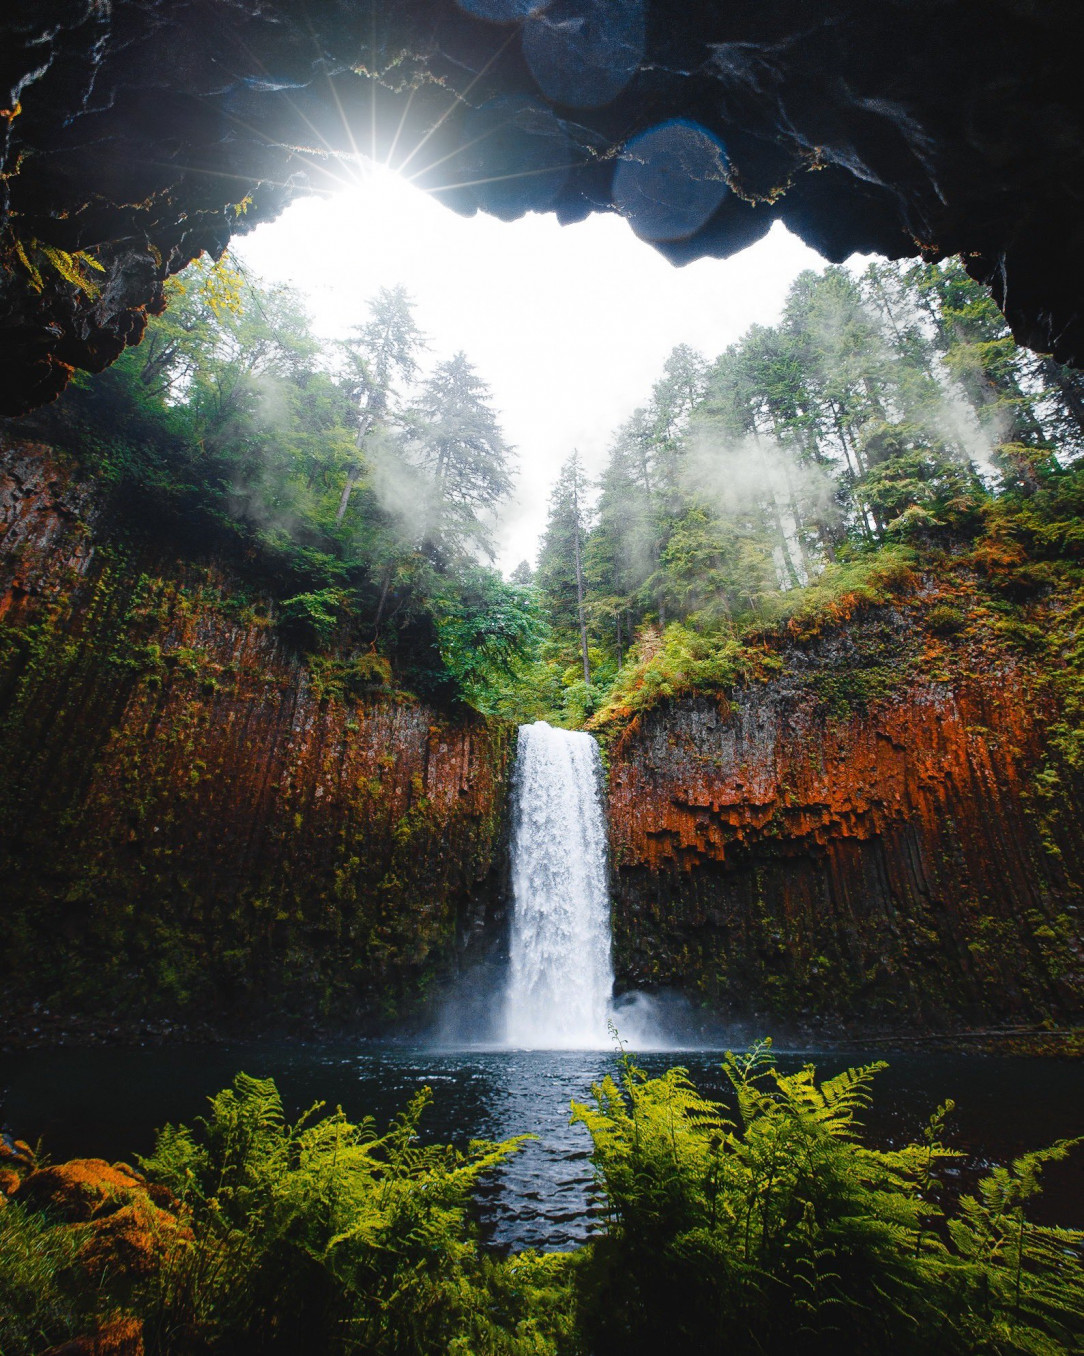 Abiqua Falls, Oregon. Where you can walk through a cave and see a waterfall